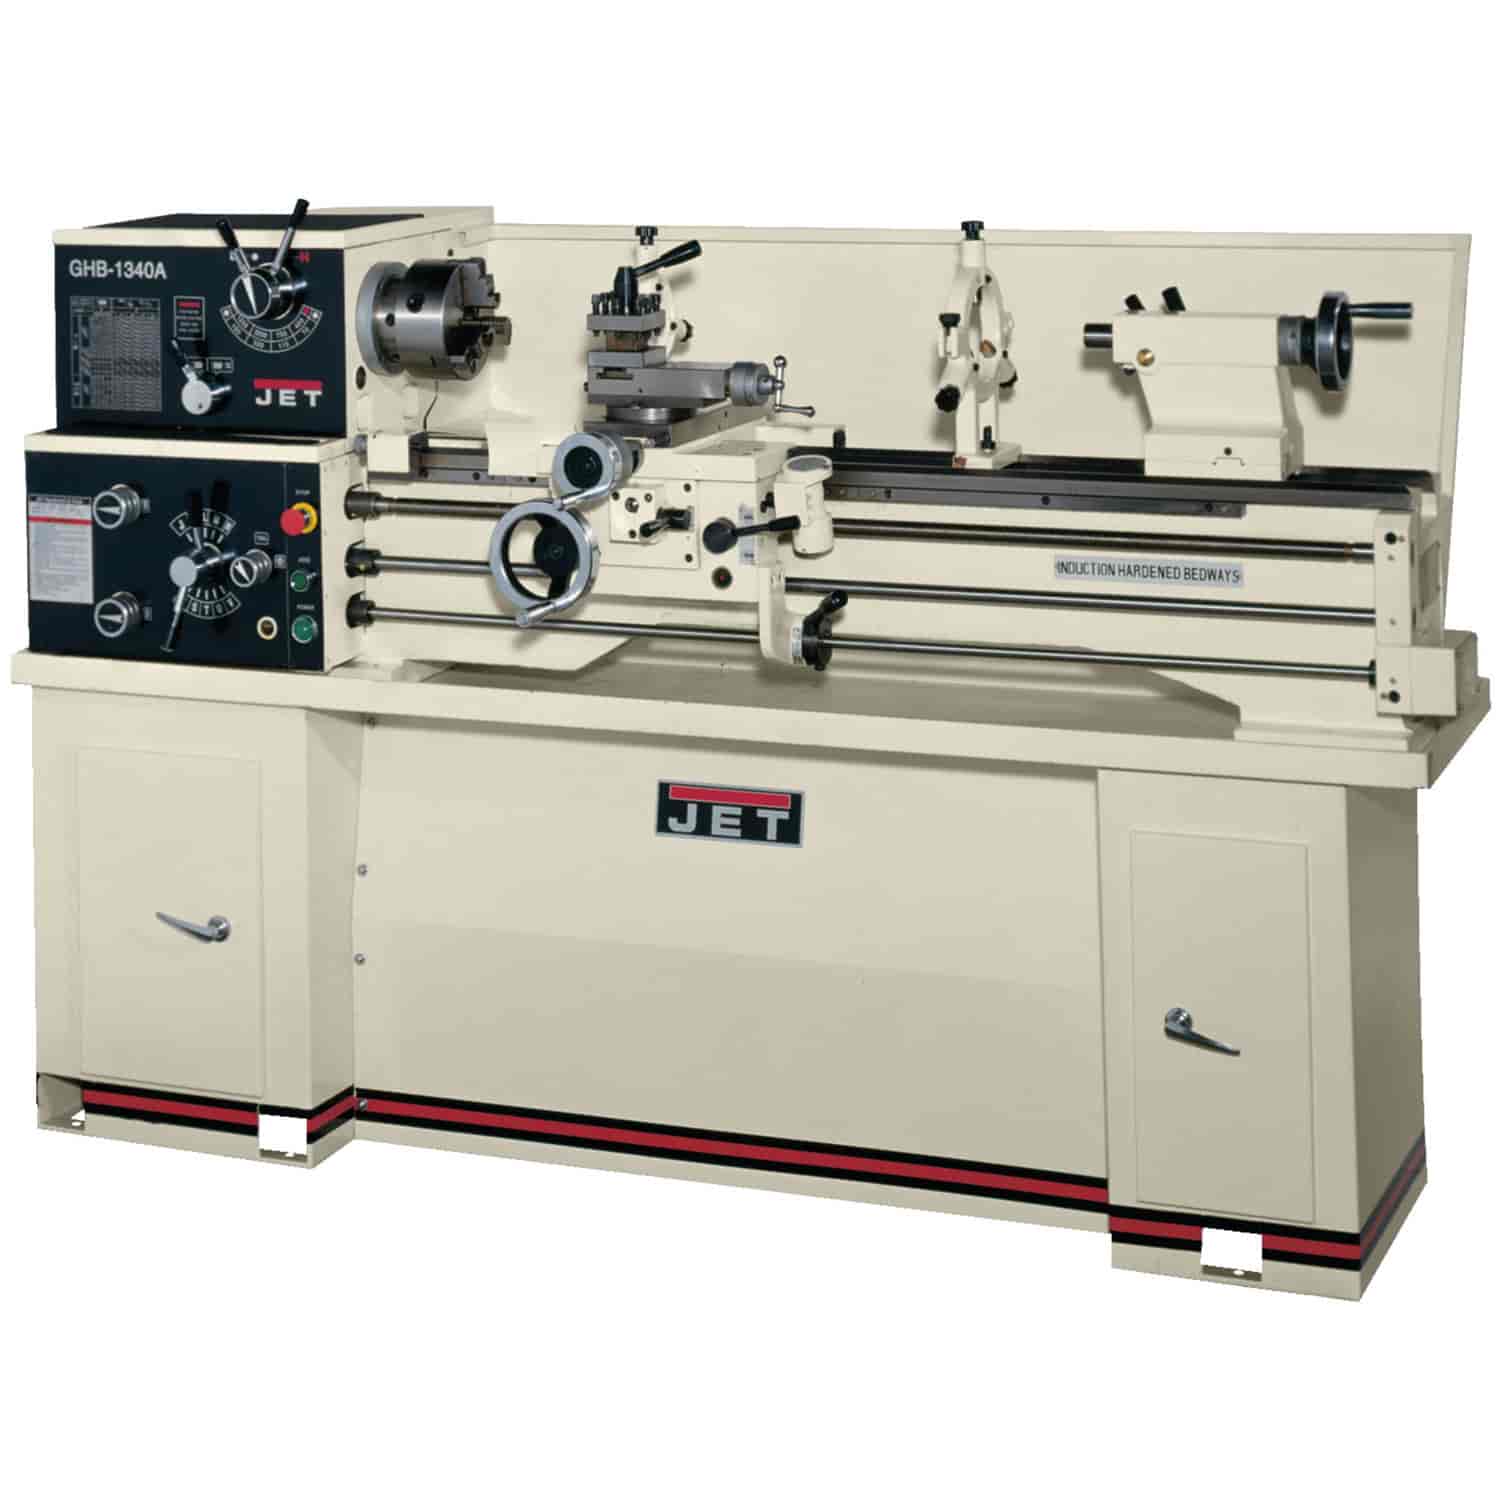 GHB-1340A Lathe With Newall DP500 DRO With Taper